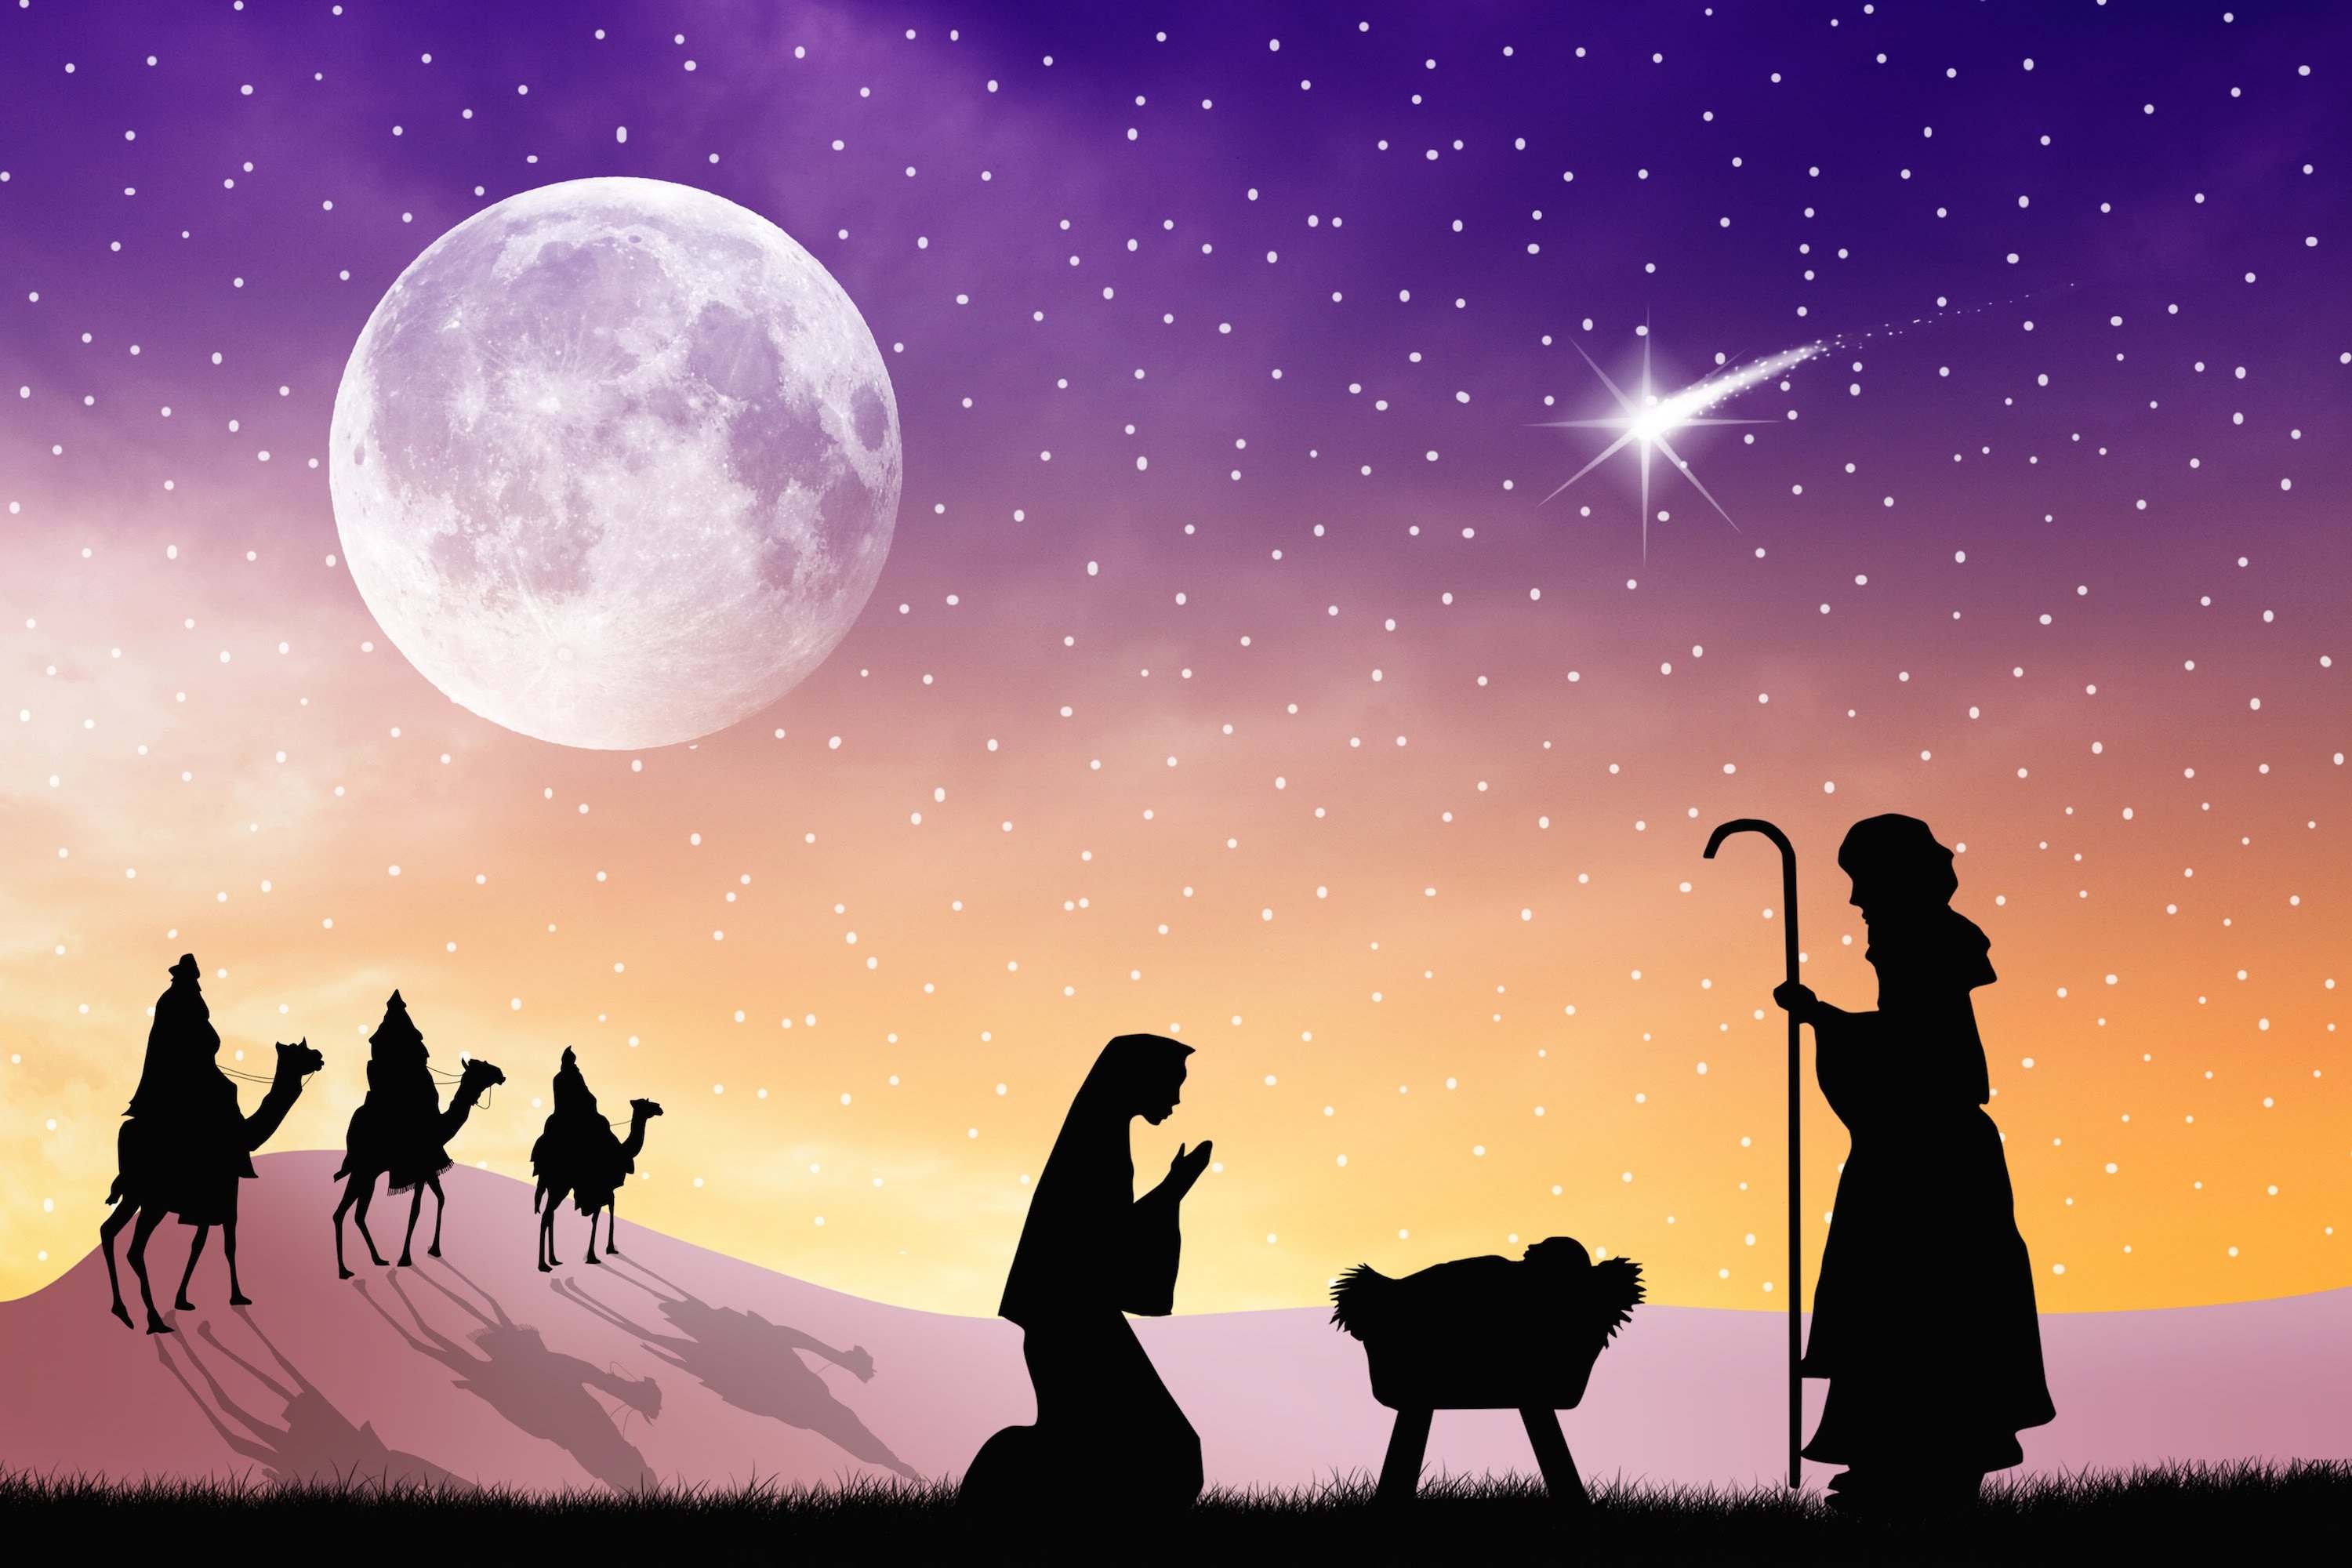 the three wise men, holiday, christmas, jesus, mary (mother of jesus), moon, stars